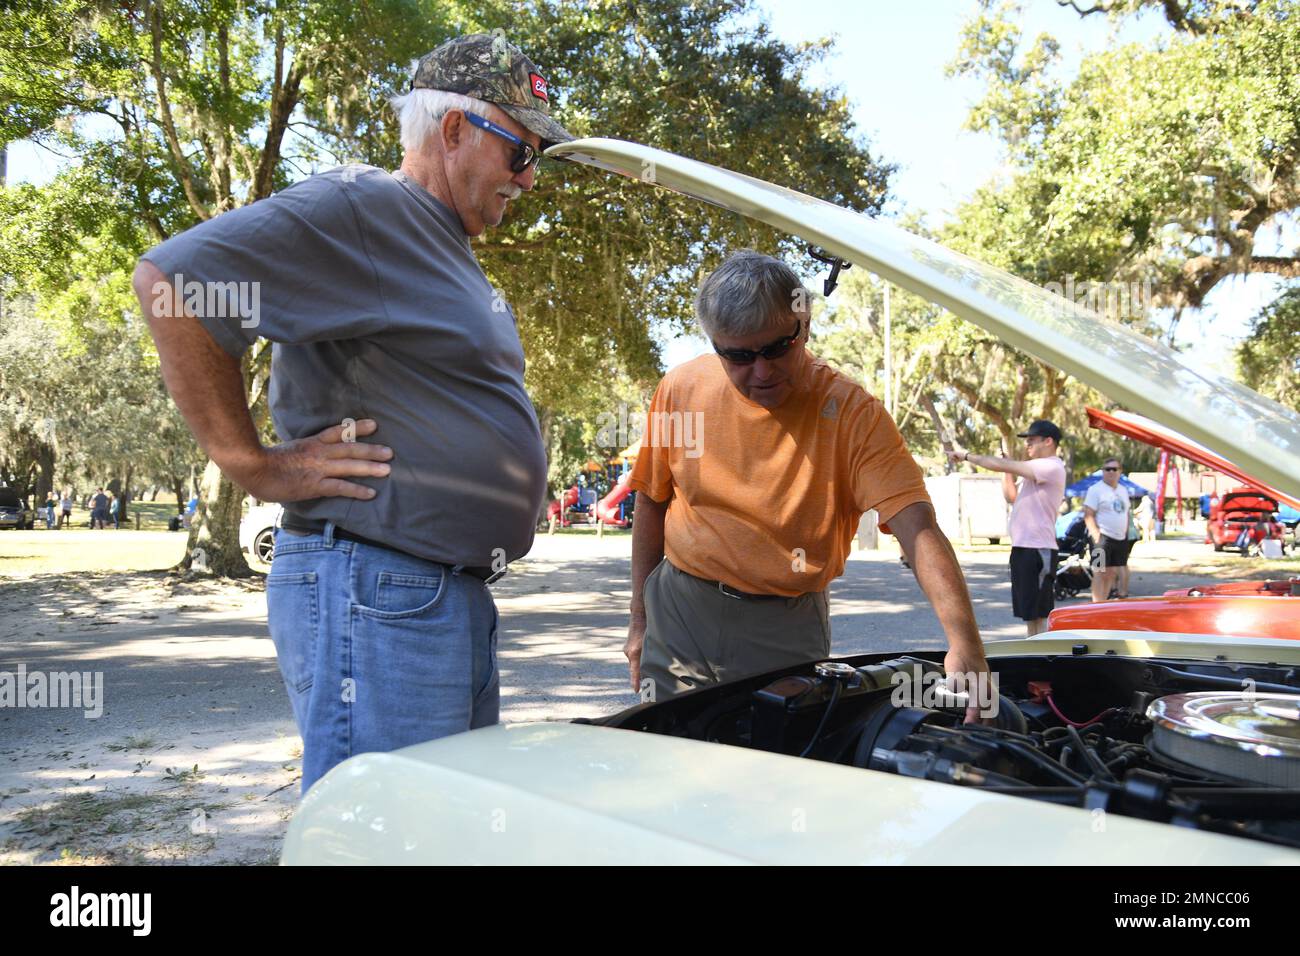 U.S. Army Retired Master Sgt. Melvin Gregory and Roger Ewing inspect an antique vehicle during the 19th Annual Cruisin' Keesler Car Show and Parade at the Marina Park at Keesler Air Force Base, Mississippi, October 1, 2022. The event is held to kick off Cruisin' the Coast, a festival to celebrate classic cars, trucks and hot rods, where vehicles cruise down the 30-mile beachside highway in Mississippi. Stock Photo